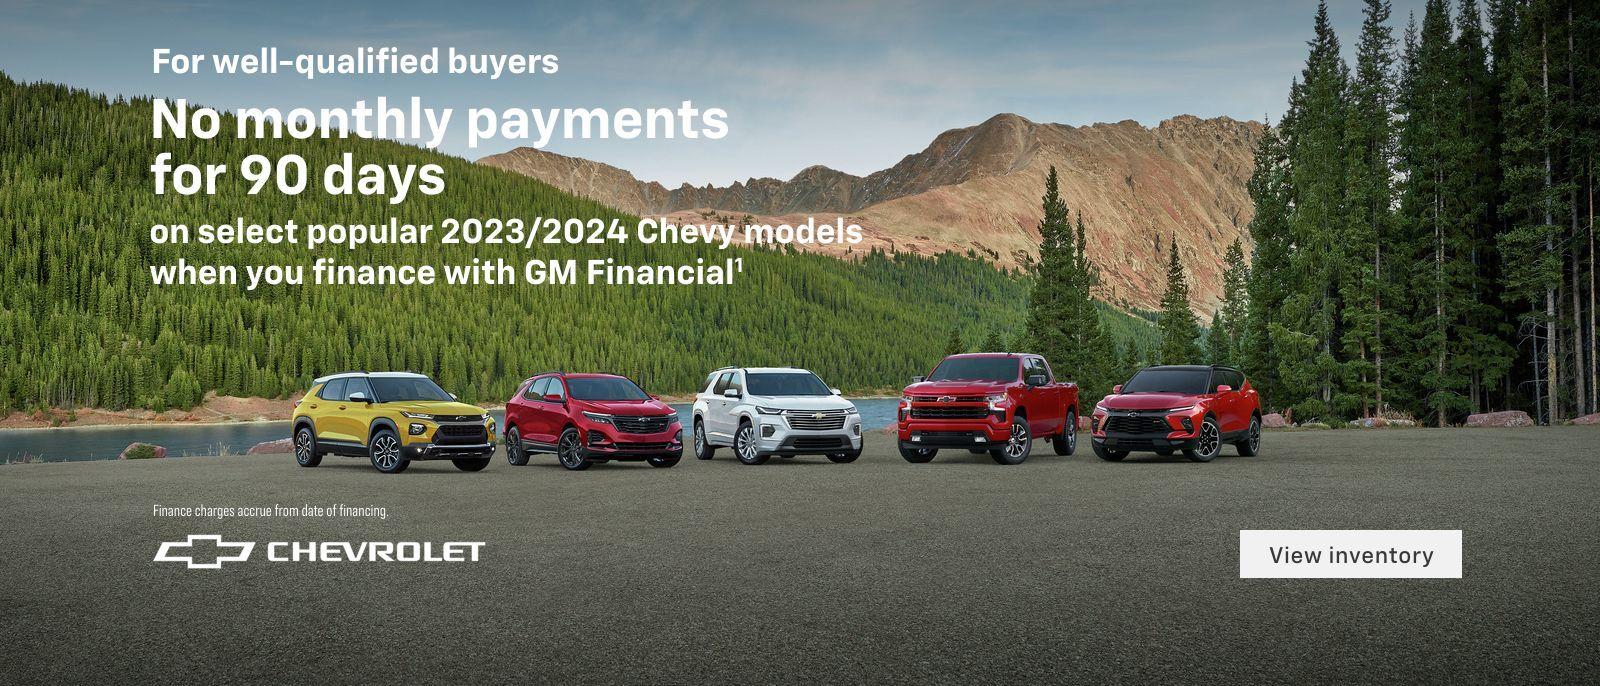 For well-qualified buyers No monthly payments for 90 days on select popular 2023/2024 Chevy models when you finance with GM Financial. Finance charges accrue from date of financing.